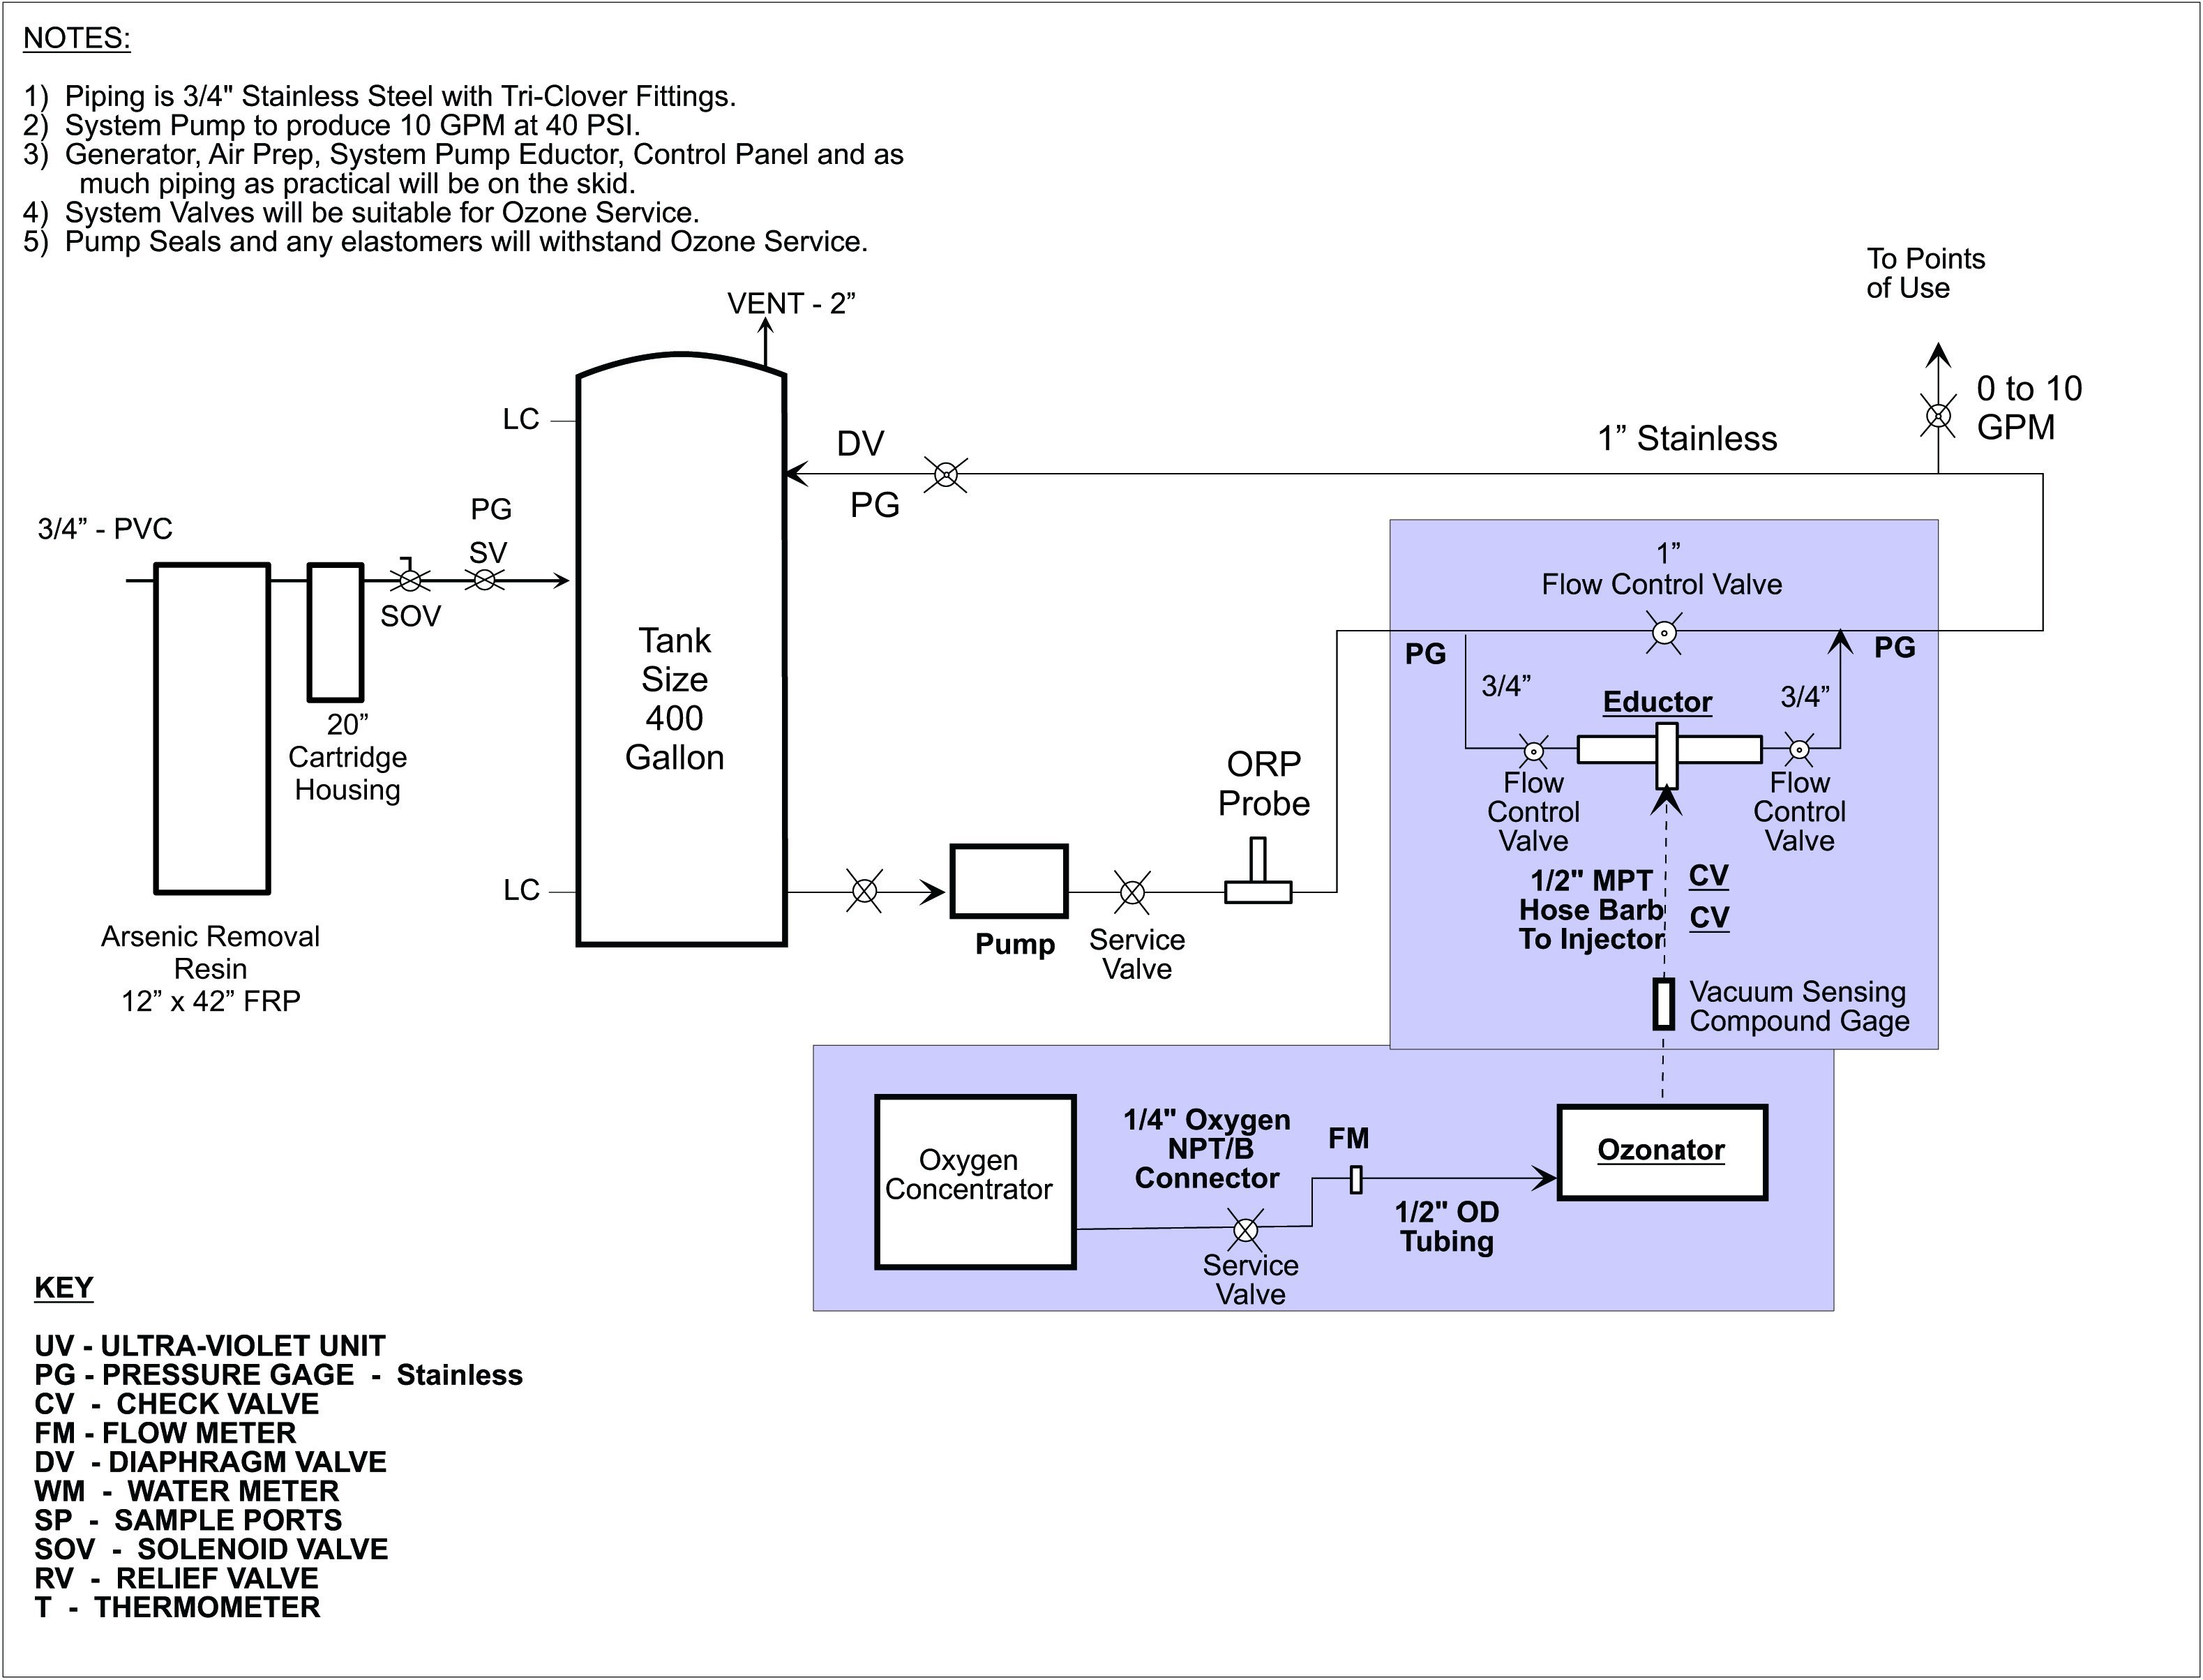 Wiring Diagram Trailer 5 Core Save Wiring Diagram For Concession Trailer Valid Food Truck Water System